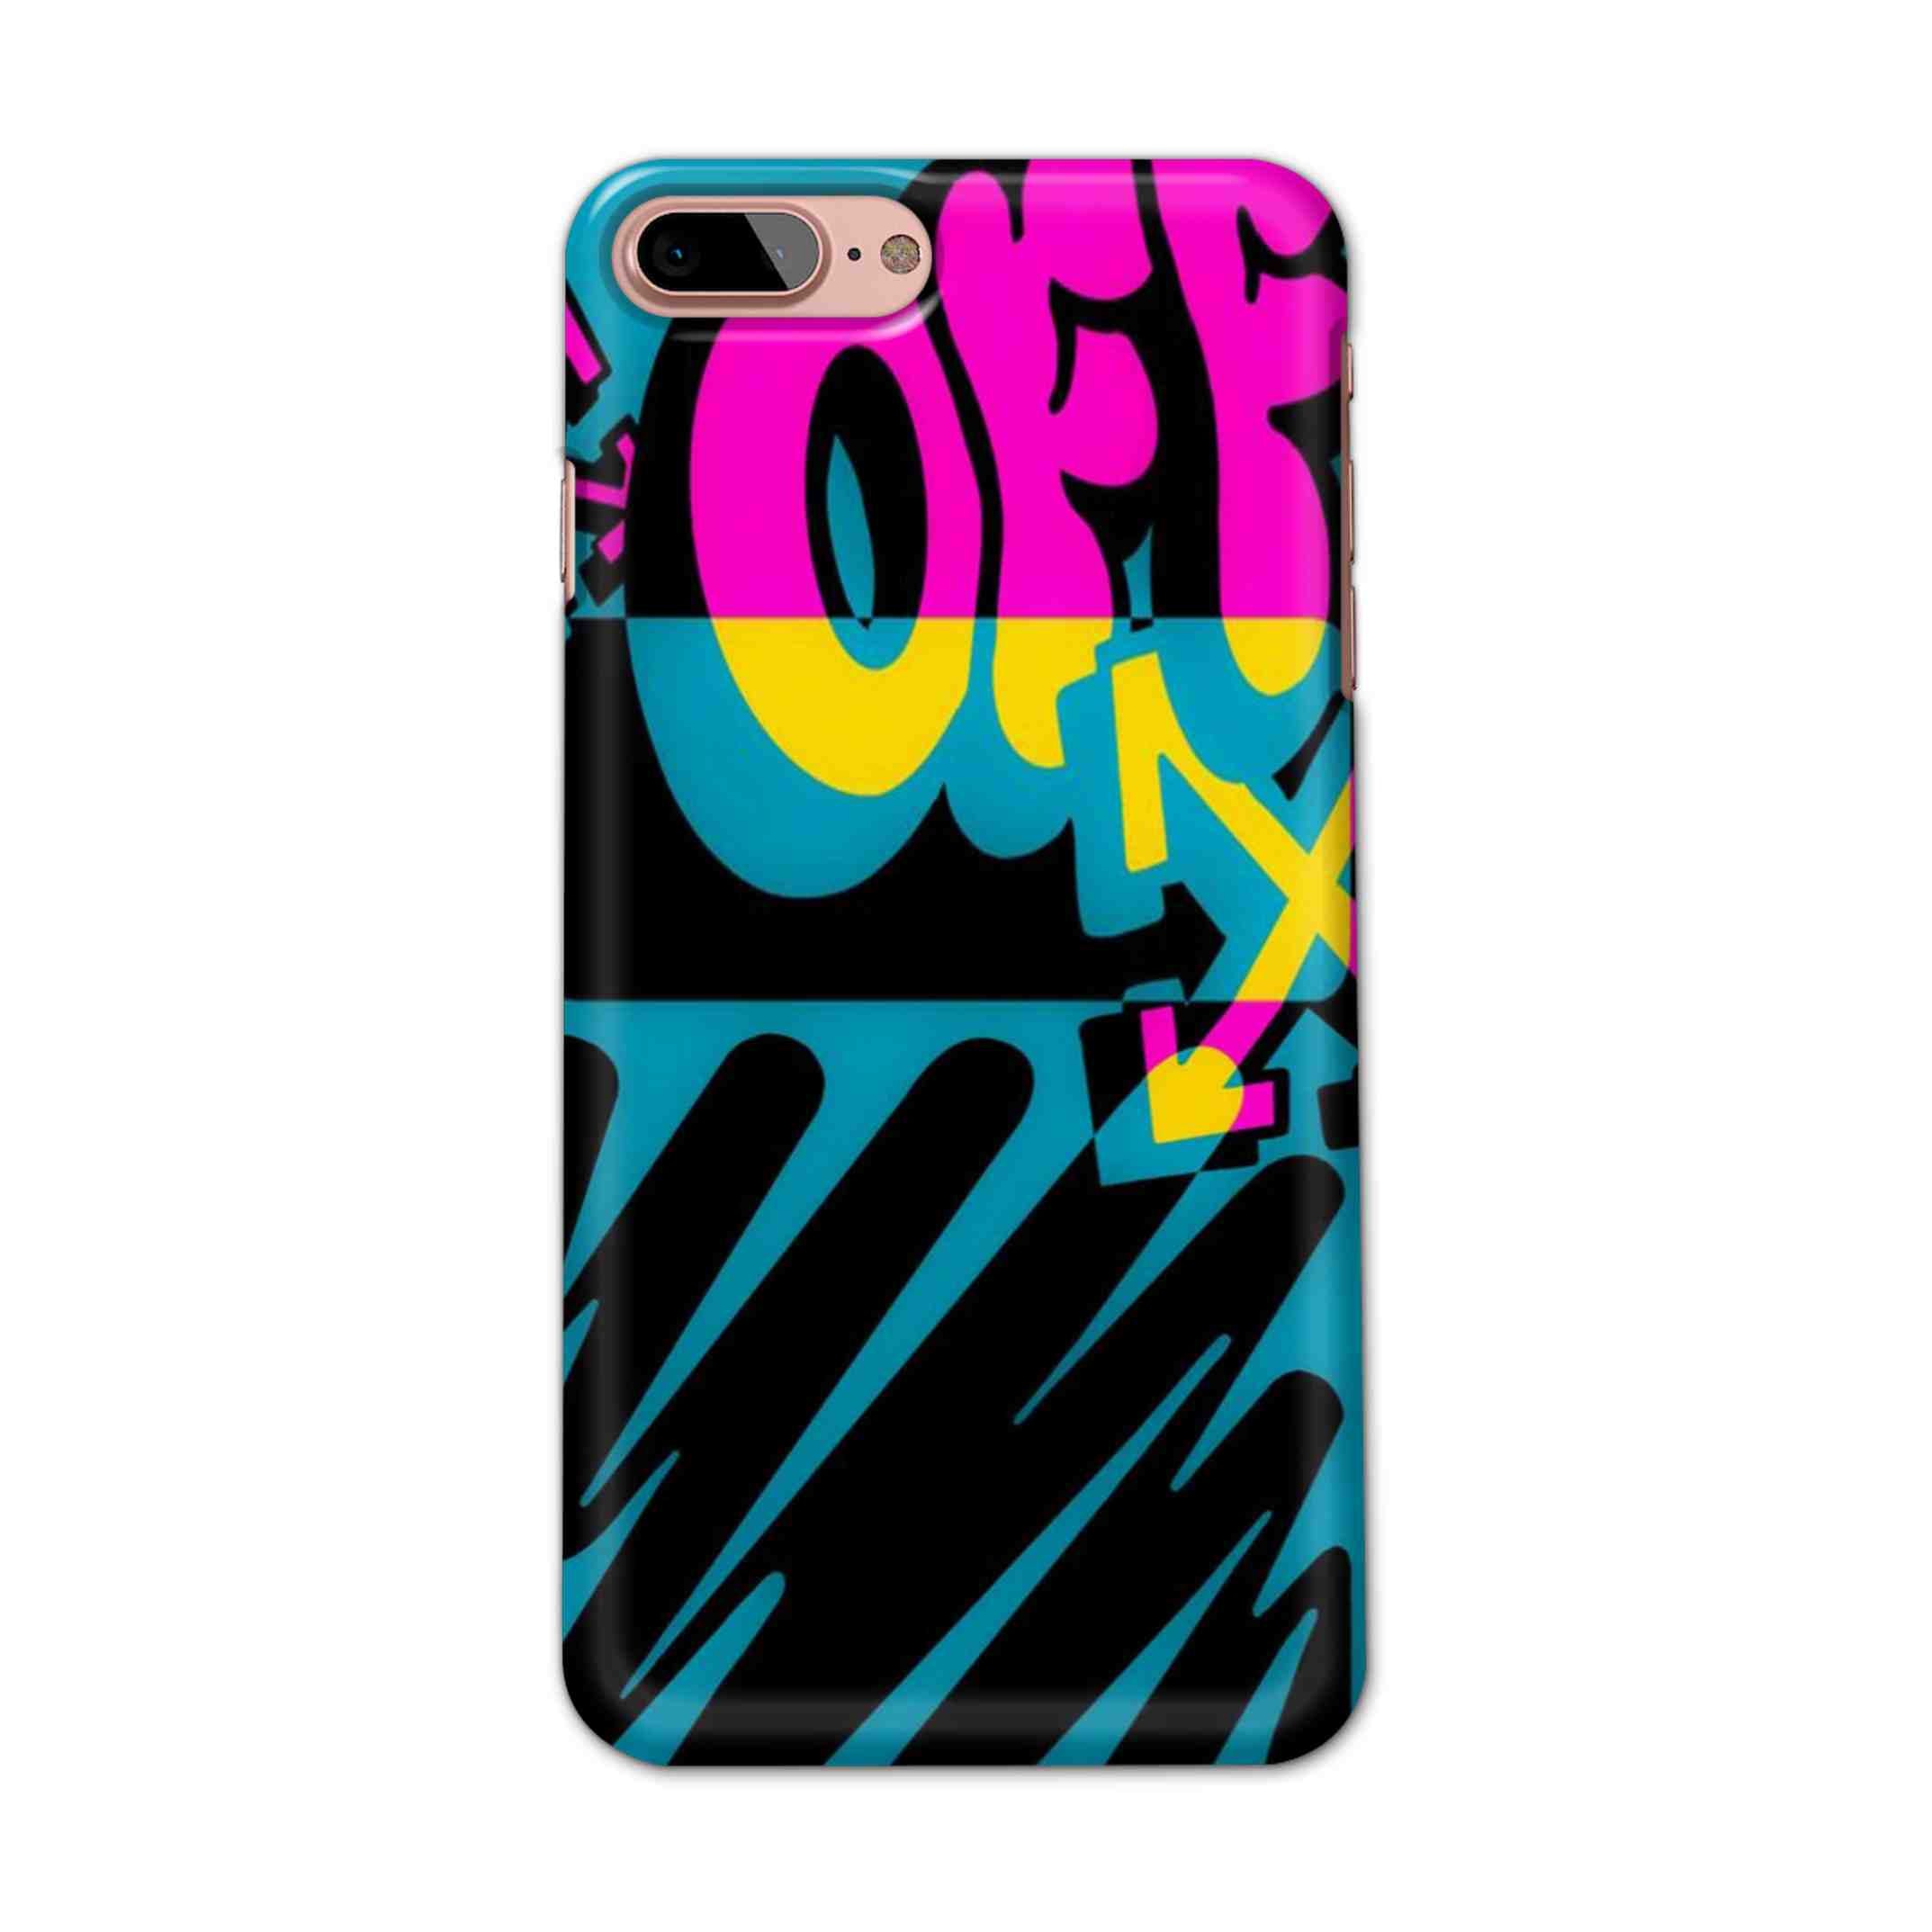 Buy Off Hard Back Mobile Phone Case/Cover For iPhone 7 Plus / 8 Plus Online